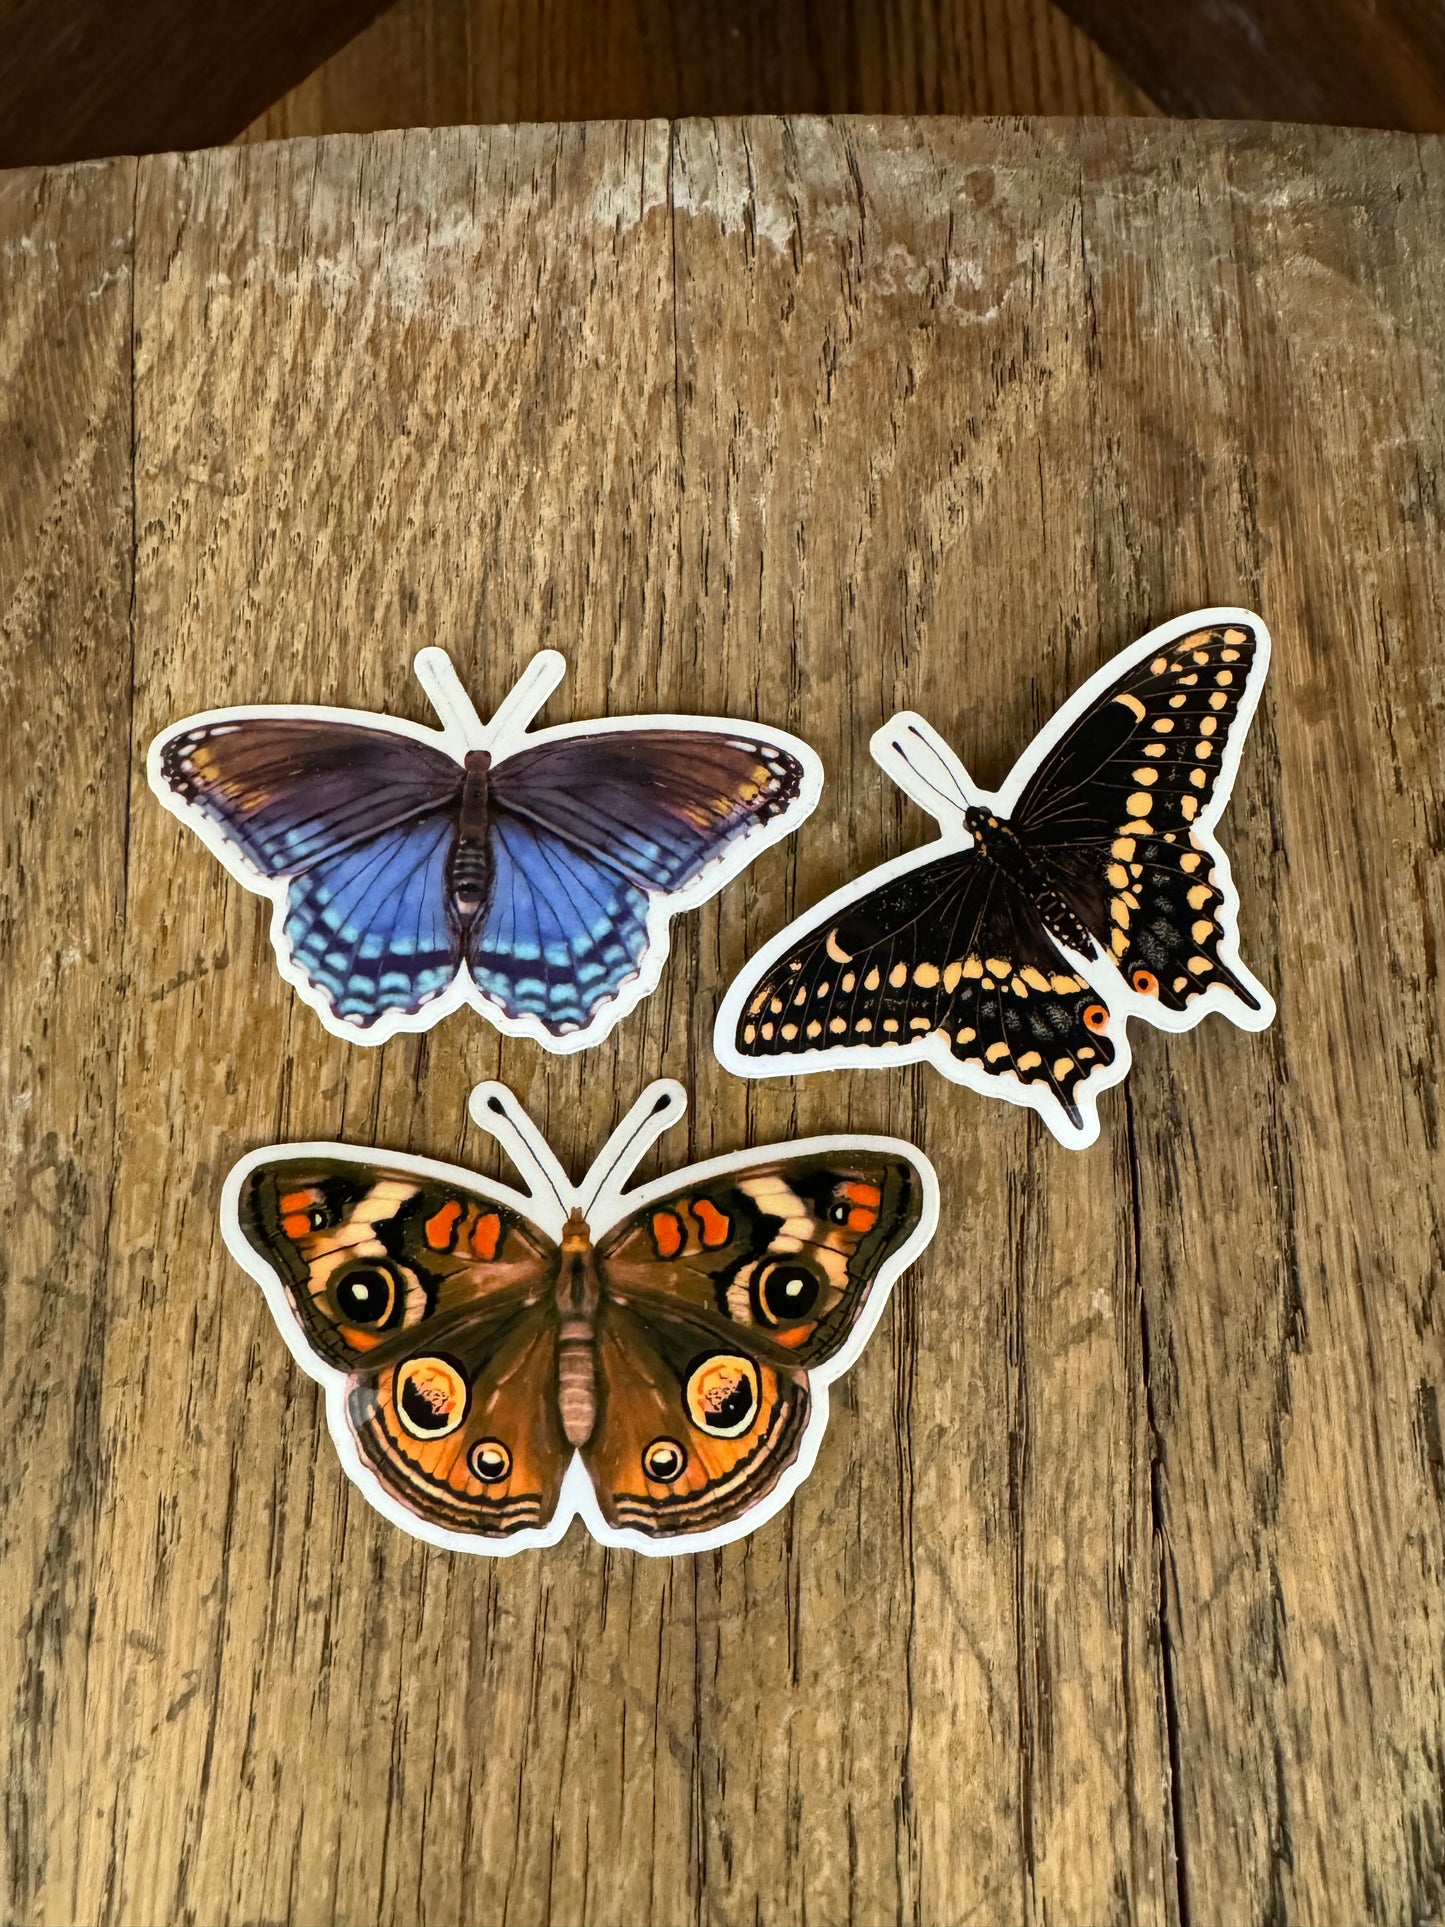 Red Spotted Butterfly Sticker